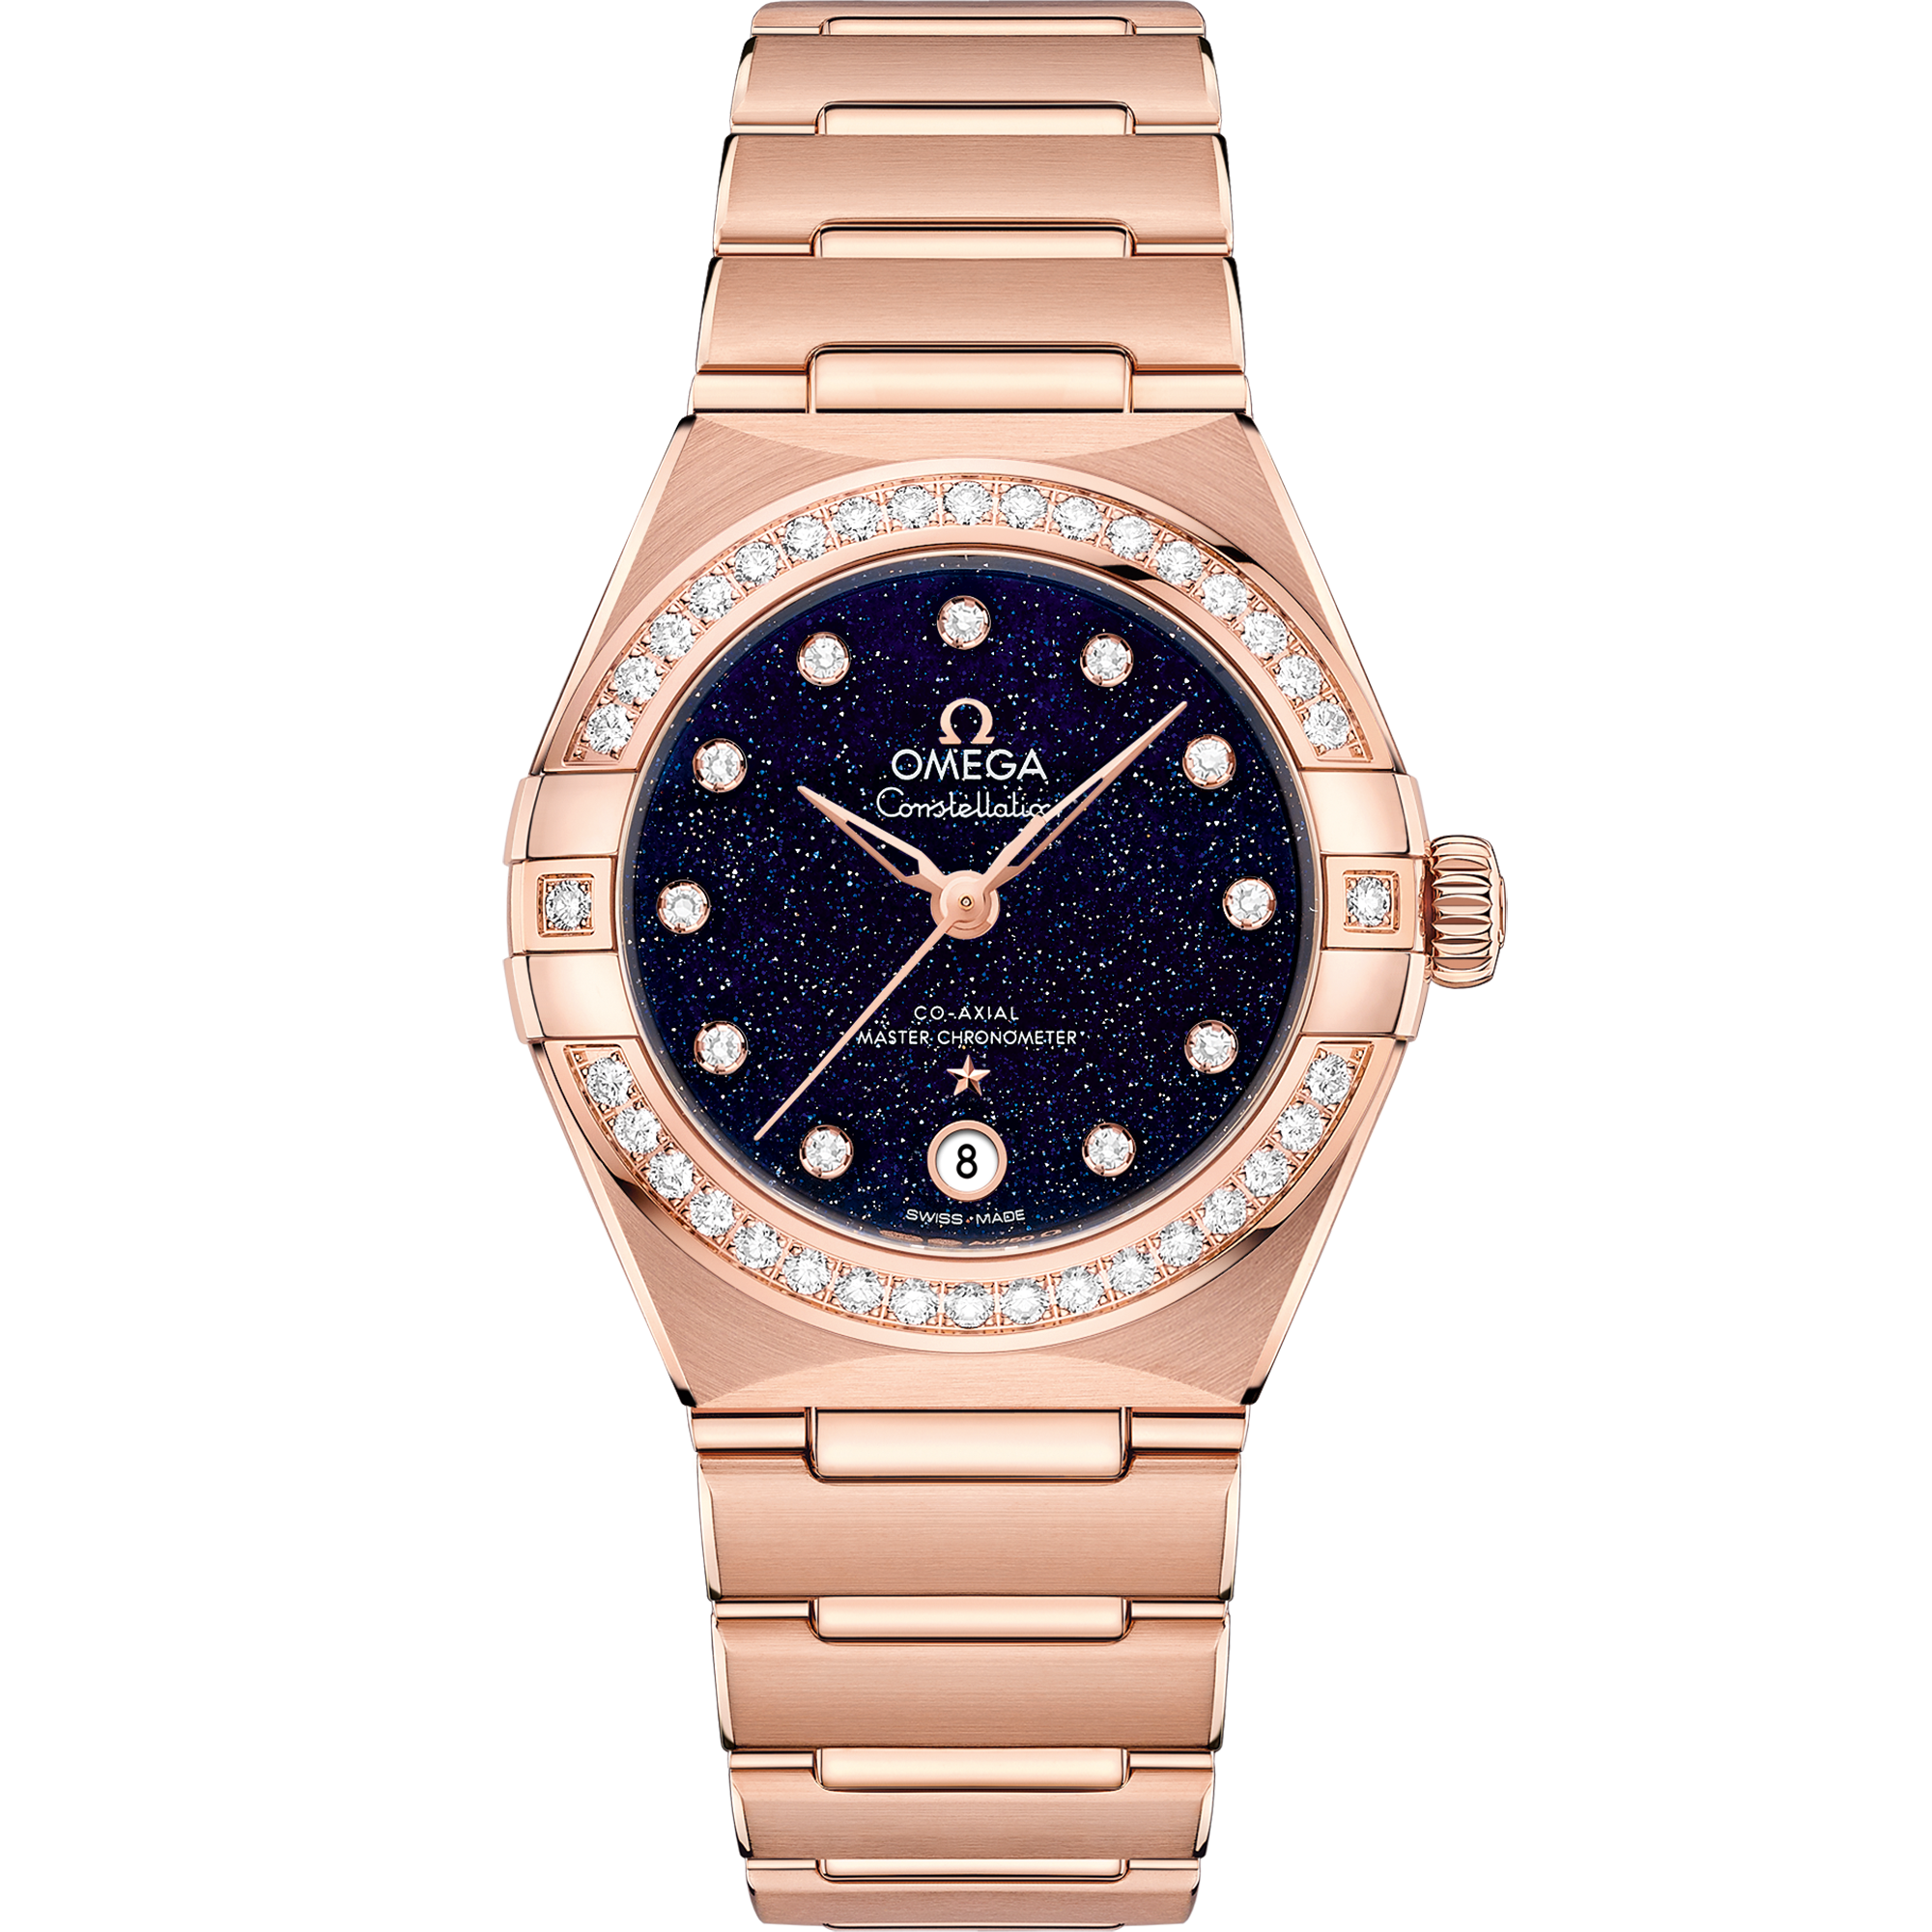 Constellation 29 mm, ouro Sedna™ em ouro Sedna™ - 131.55.29.20.53.003